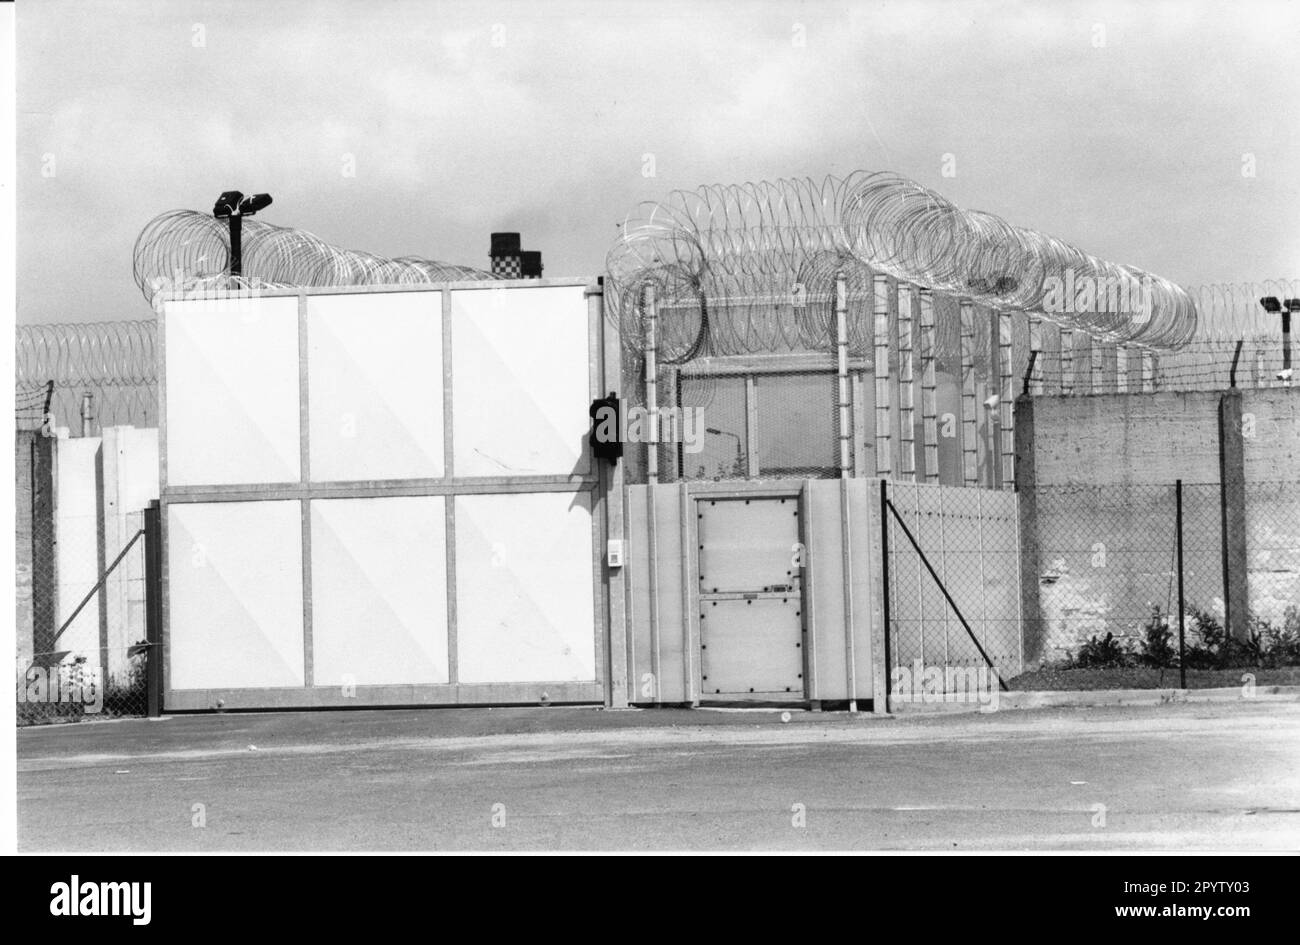 'Prison ''Schwarze Pumpe'' (Spemberg, Spree-Neiße district). The entrance gate after renewal of security measures. The new weir wall is 6.50 meters high.Prison. Photo: MAZ Laudien, 04.07.1995 [automated translation]' Stock Photo